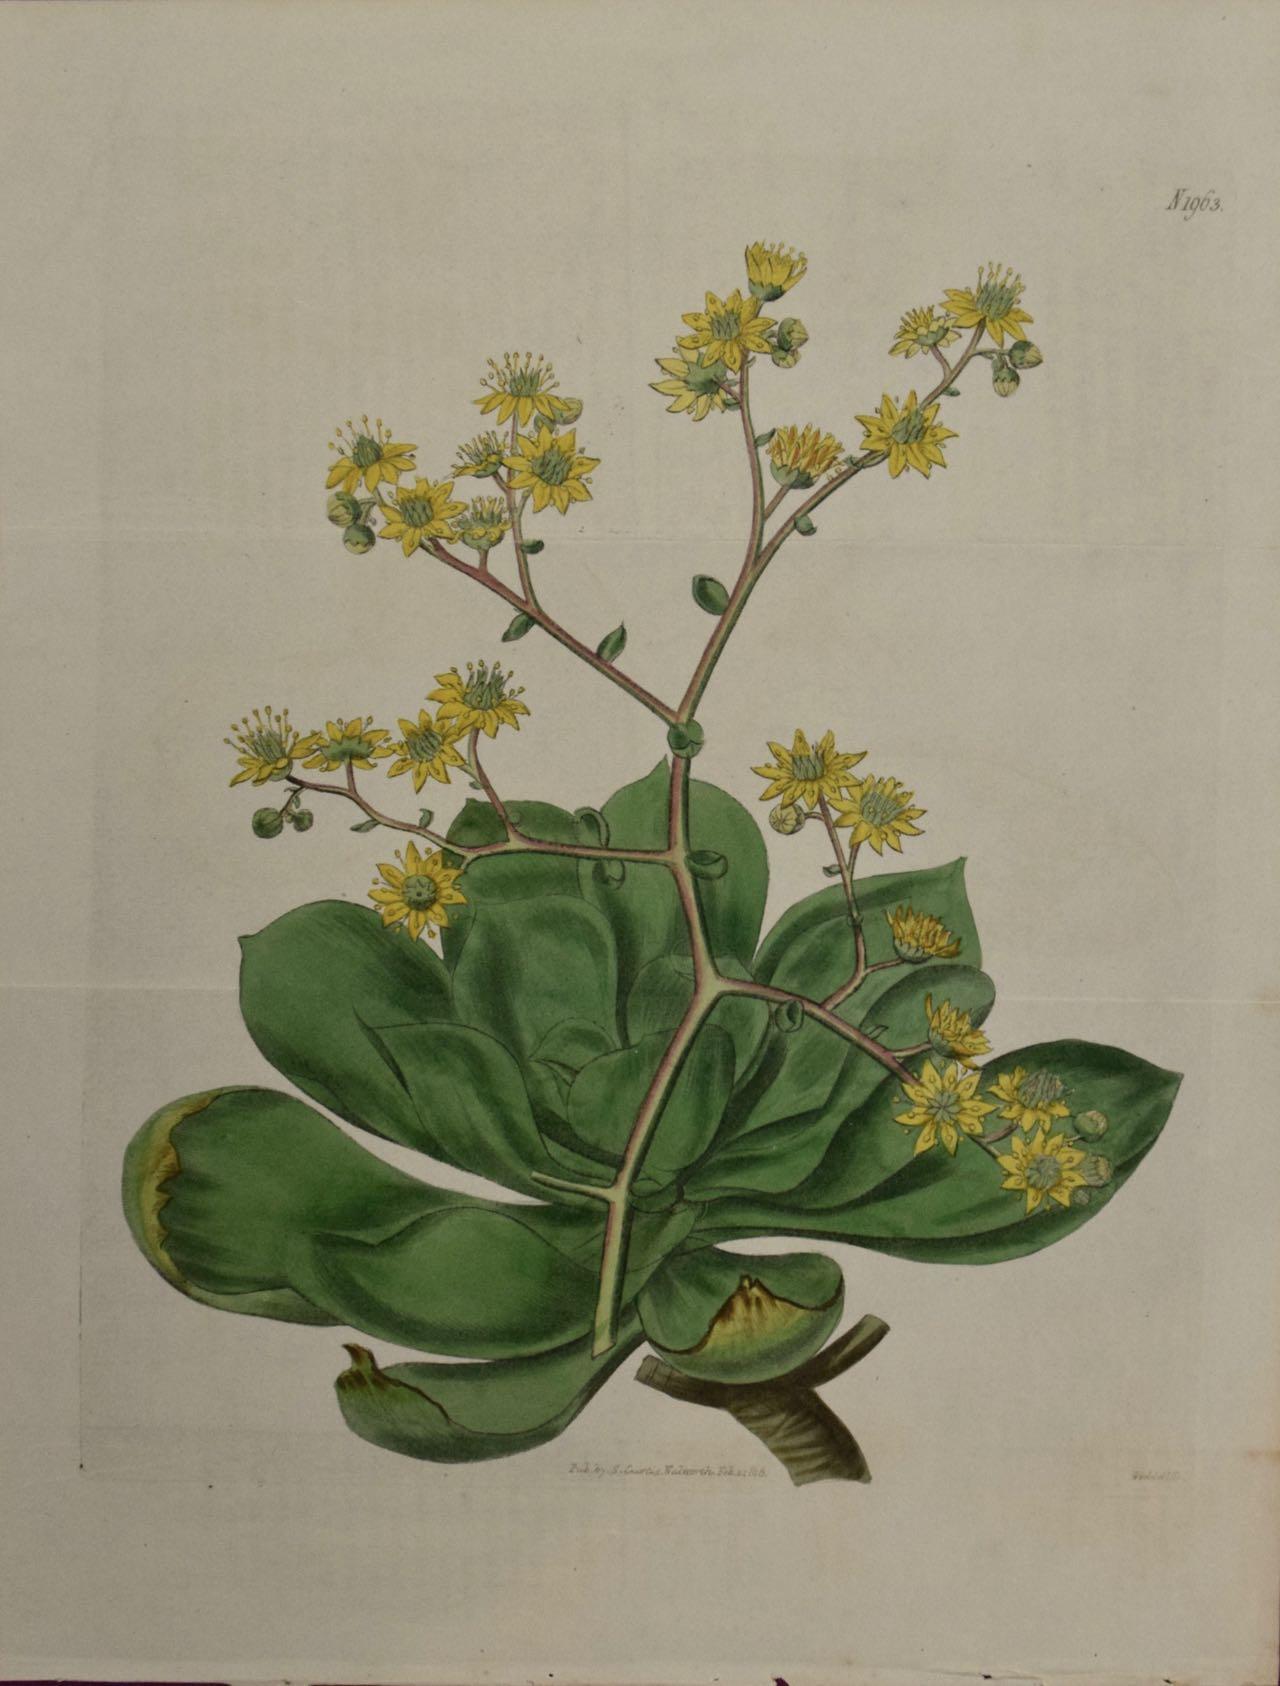 William Curtis Still-Life Print - Flowering Houseleek Plant: A 19th C. Hand-colored Botanical Engraving by Curtis